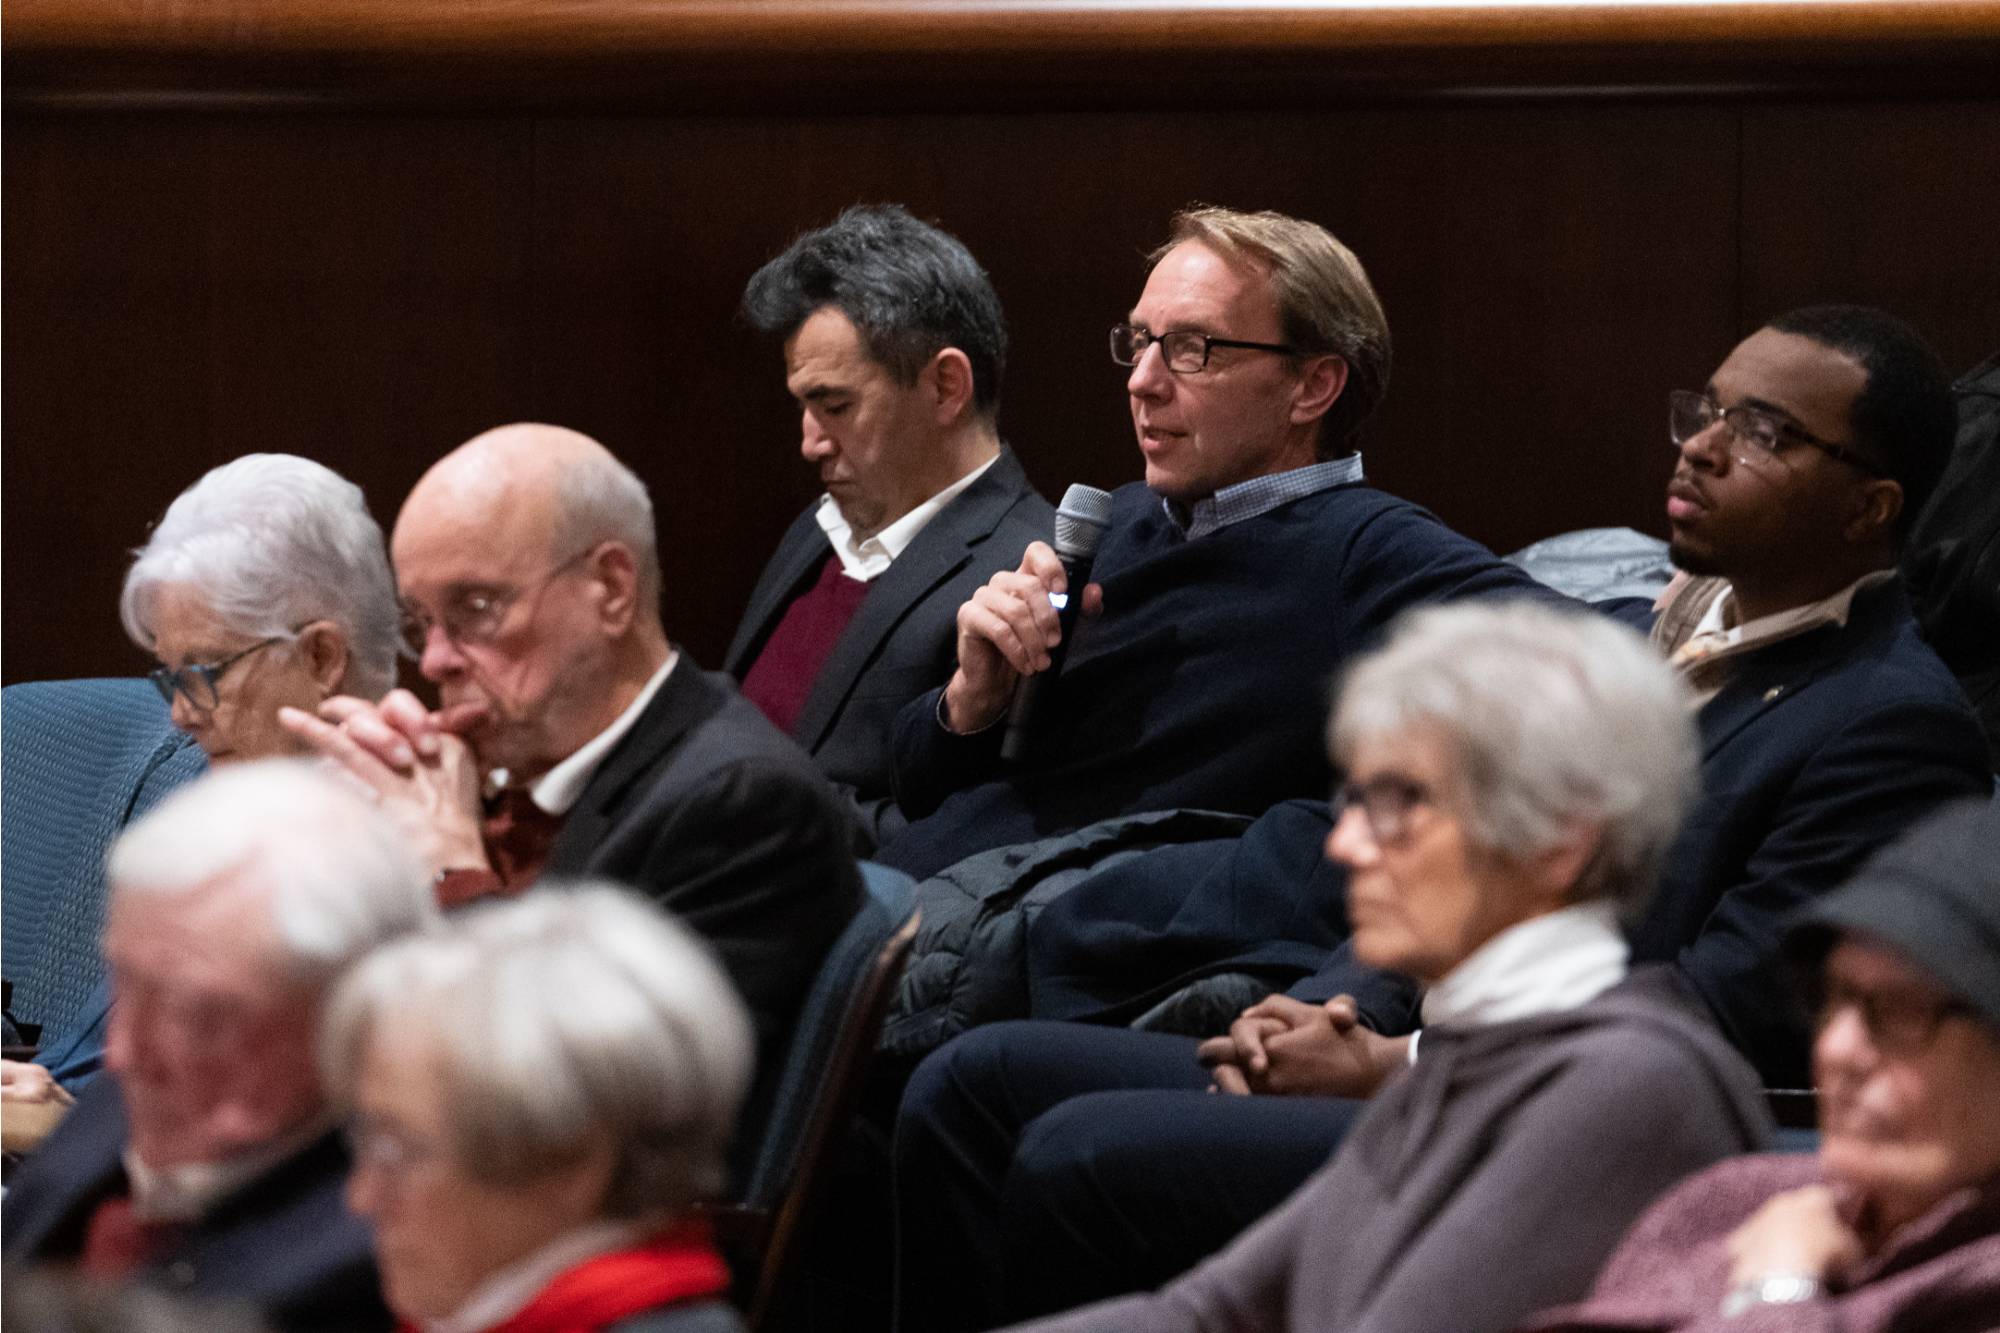 Eyeing The Bench: A Supreme Court Panel - Event Photo